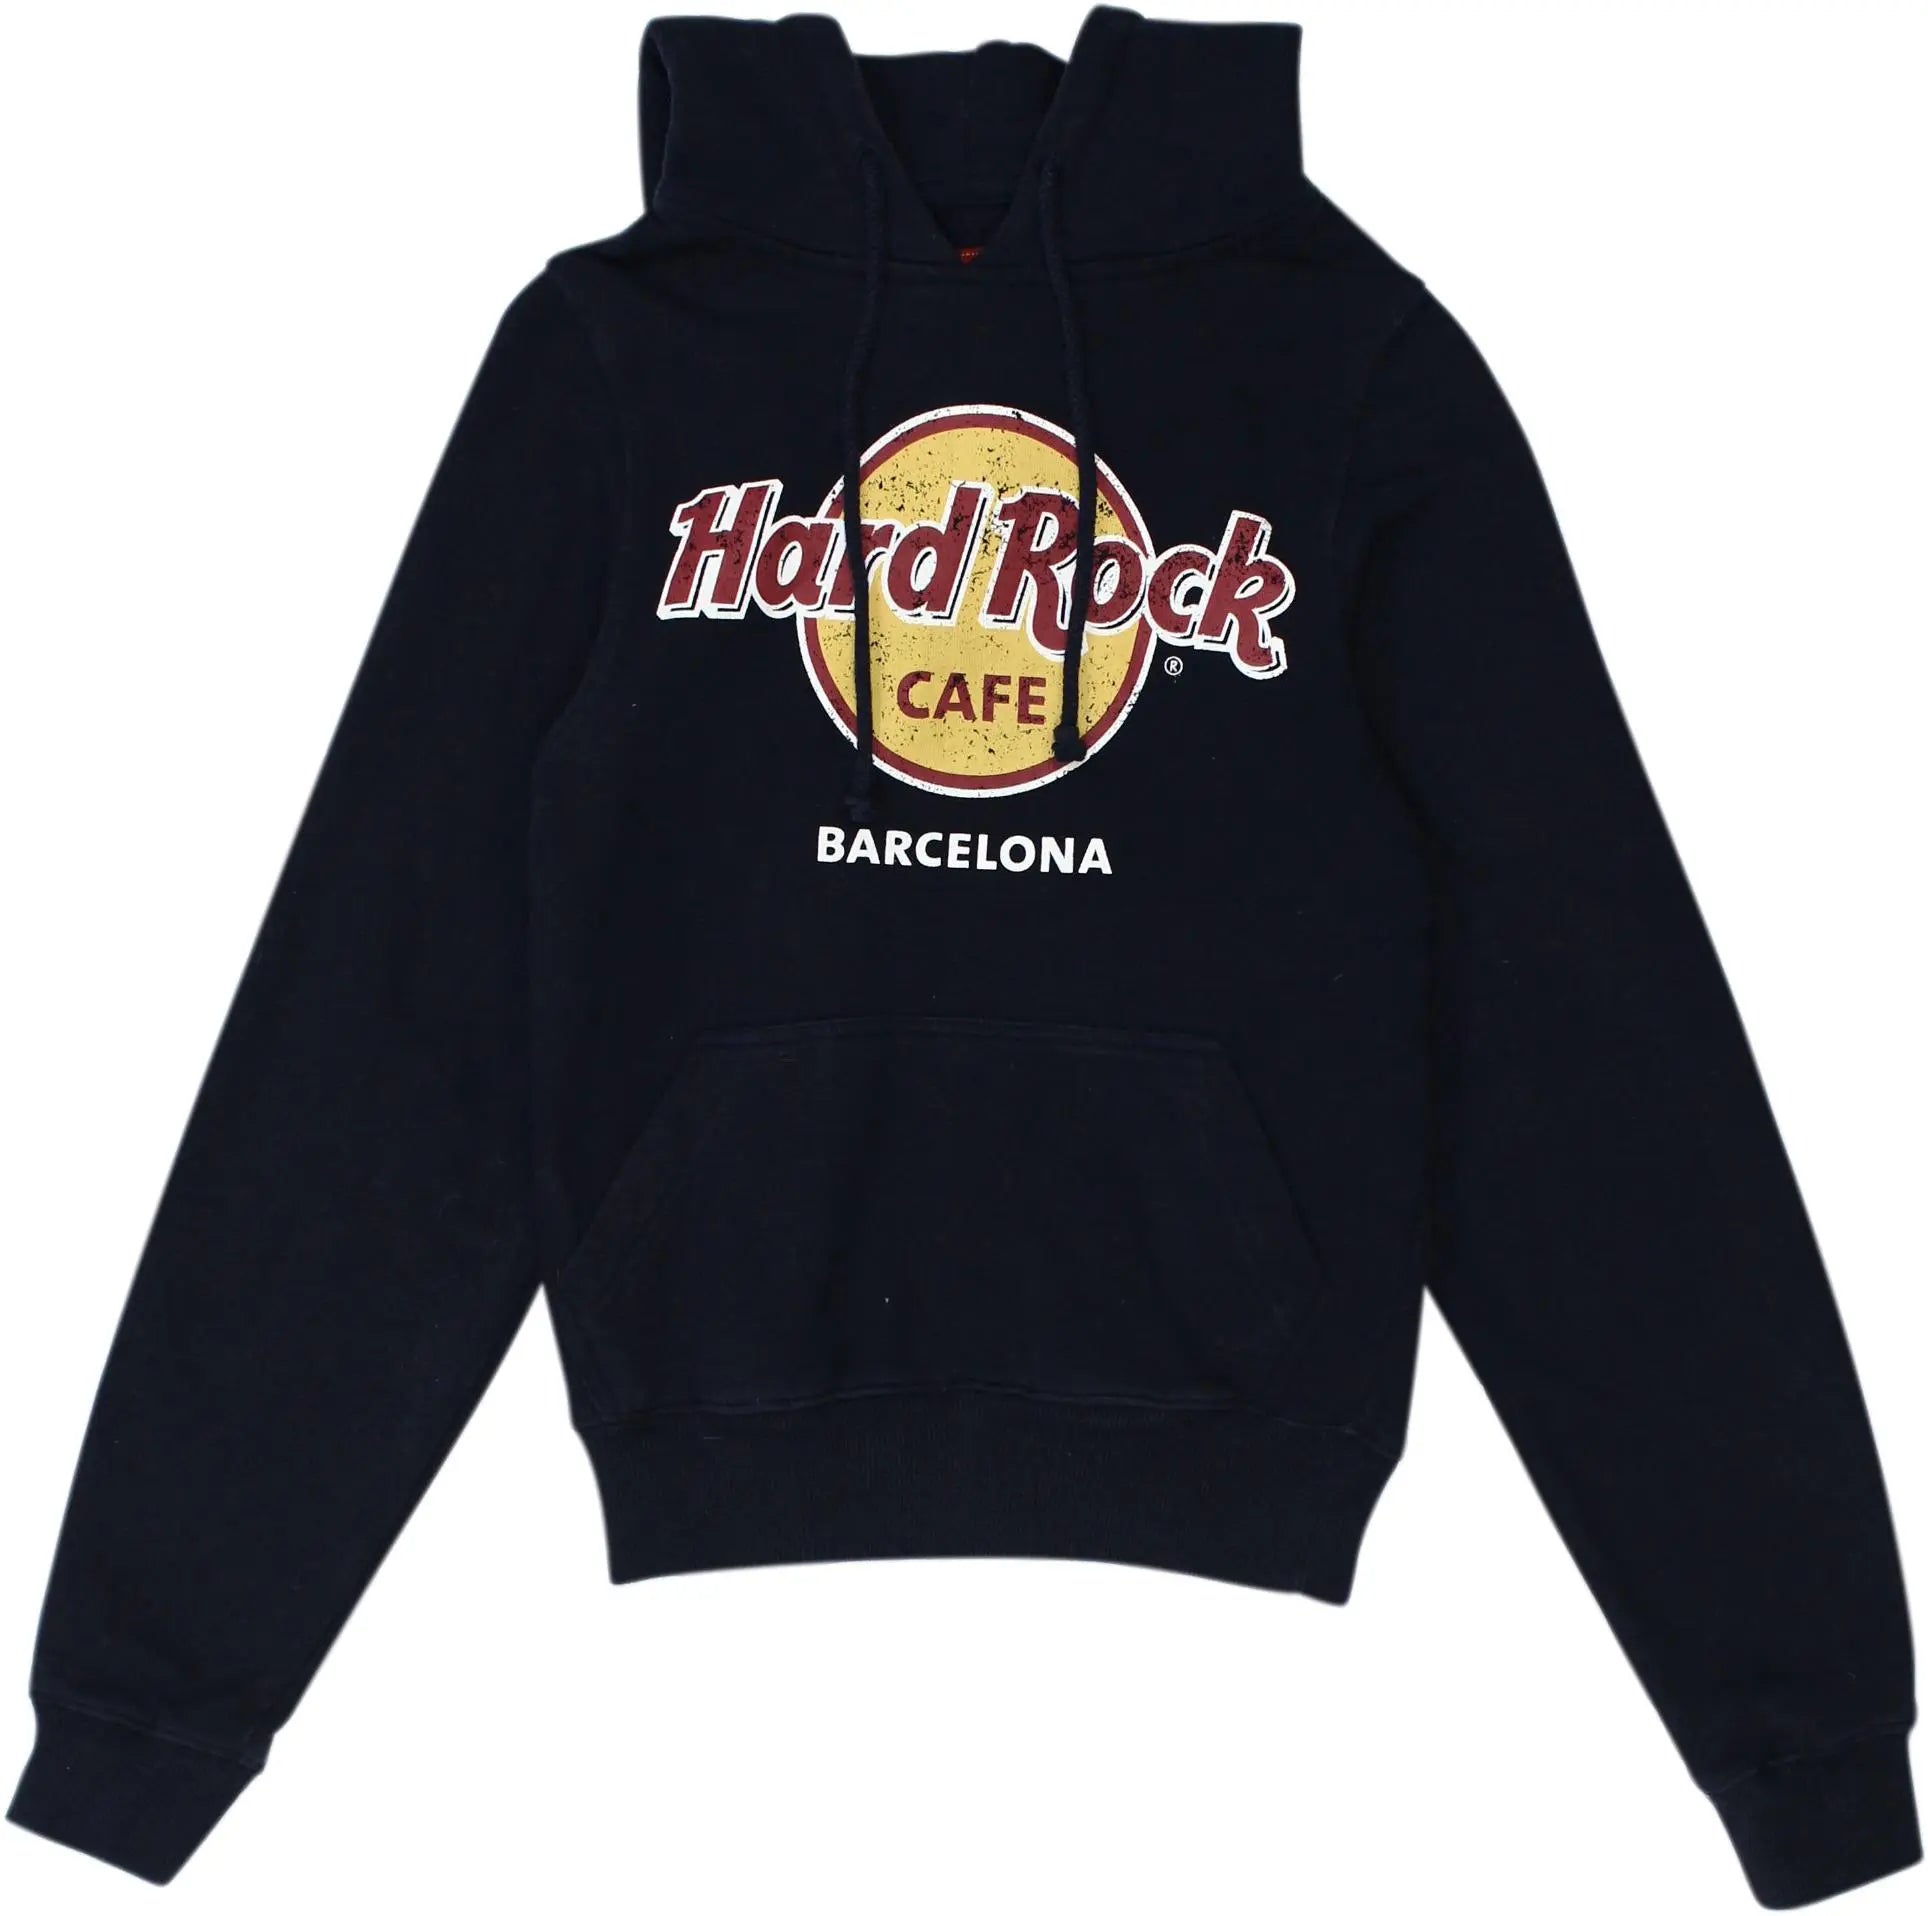 Hard Rock Cafe - Blue Sweater by Hard Rock Cafe- ThriftTale.com - Vintage and second handclothing